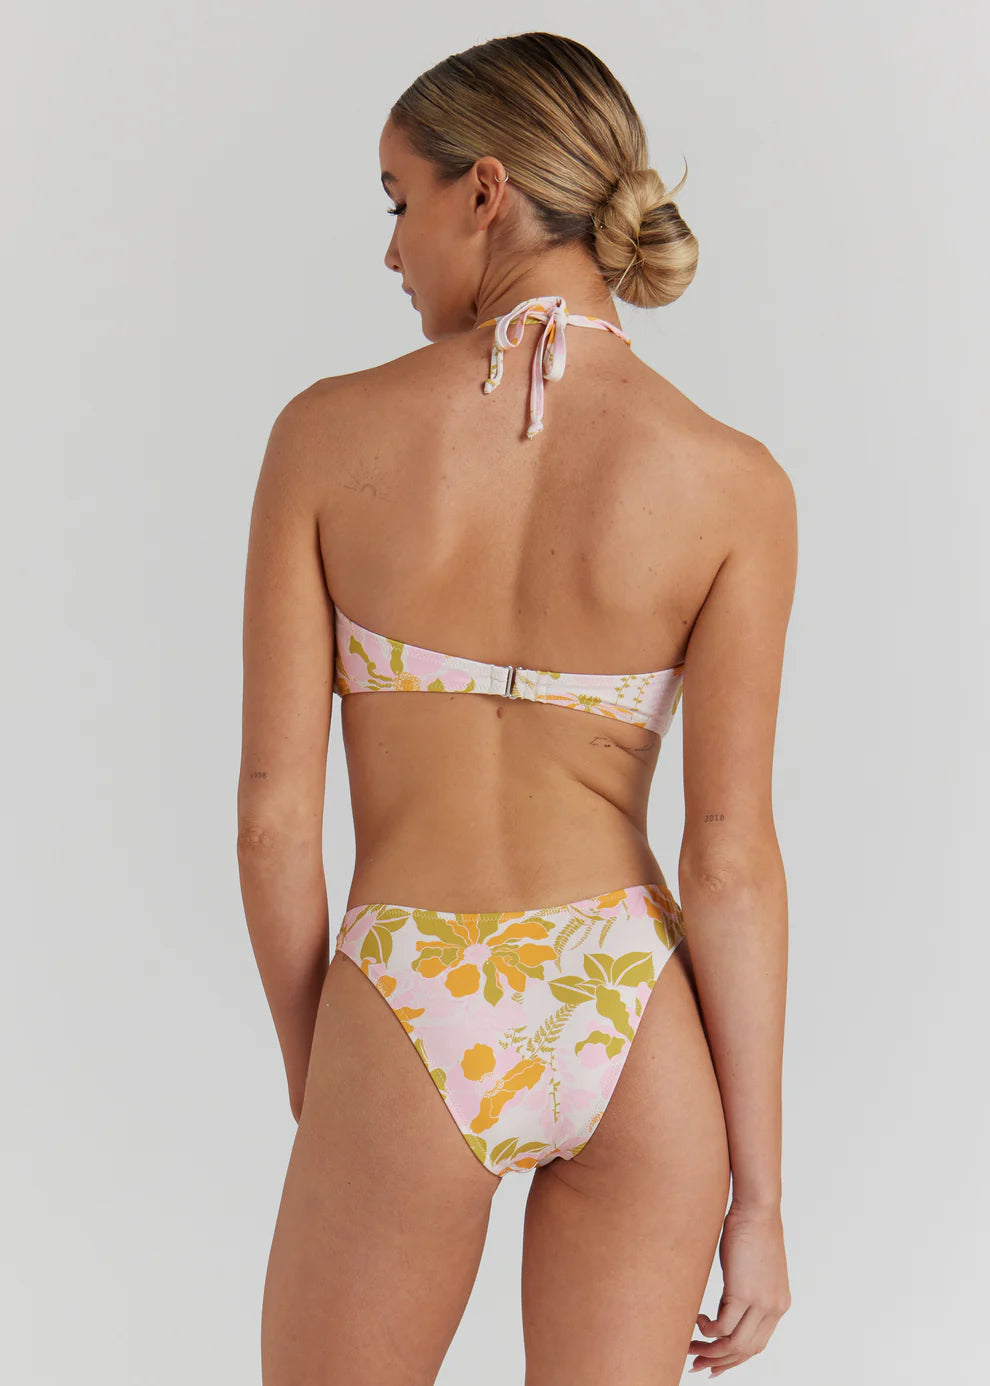 For long summer days, our Positano Bandeau style is effortless and easy to wear.